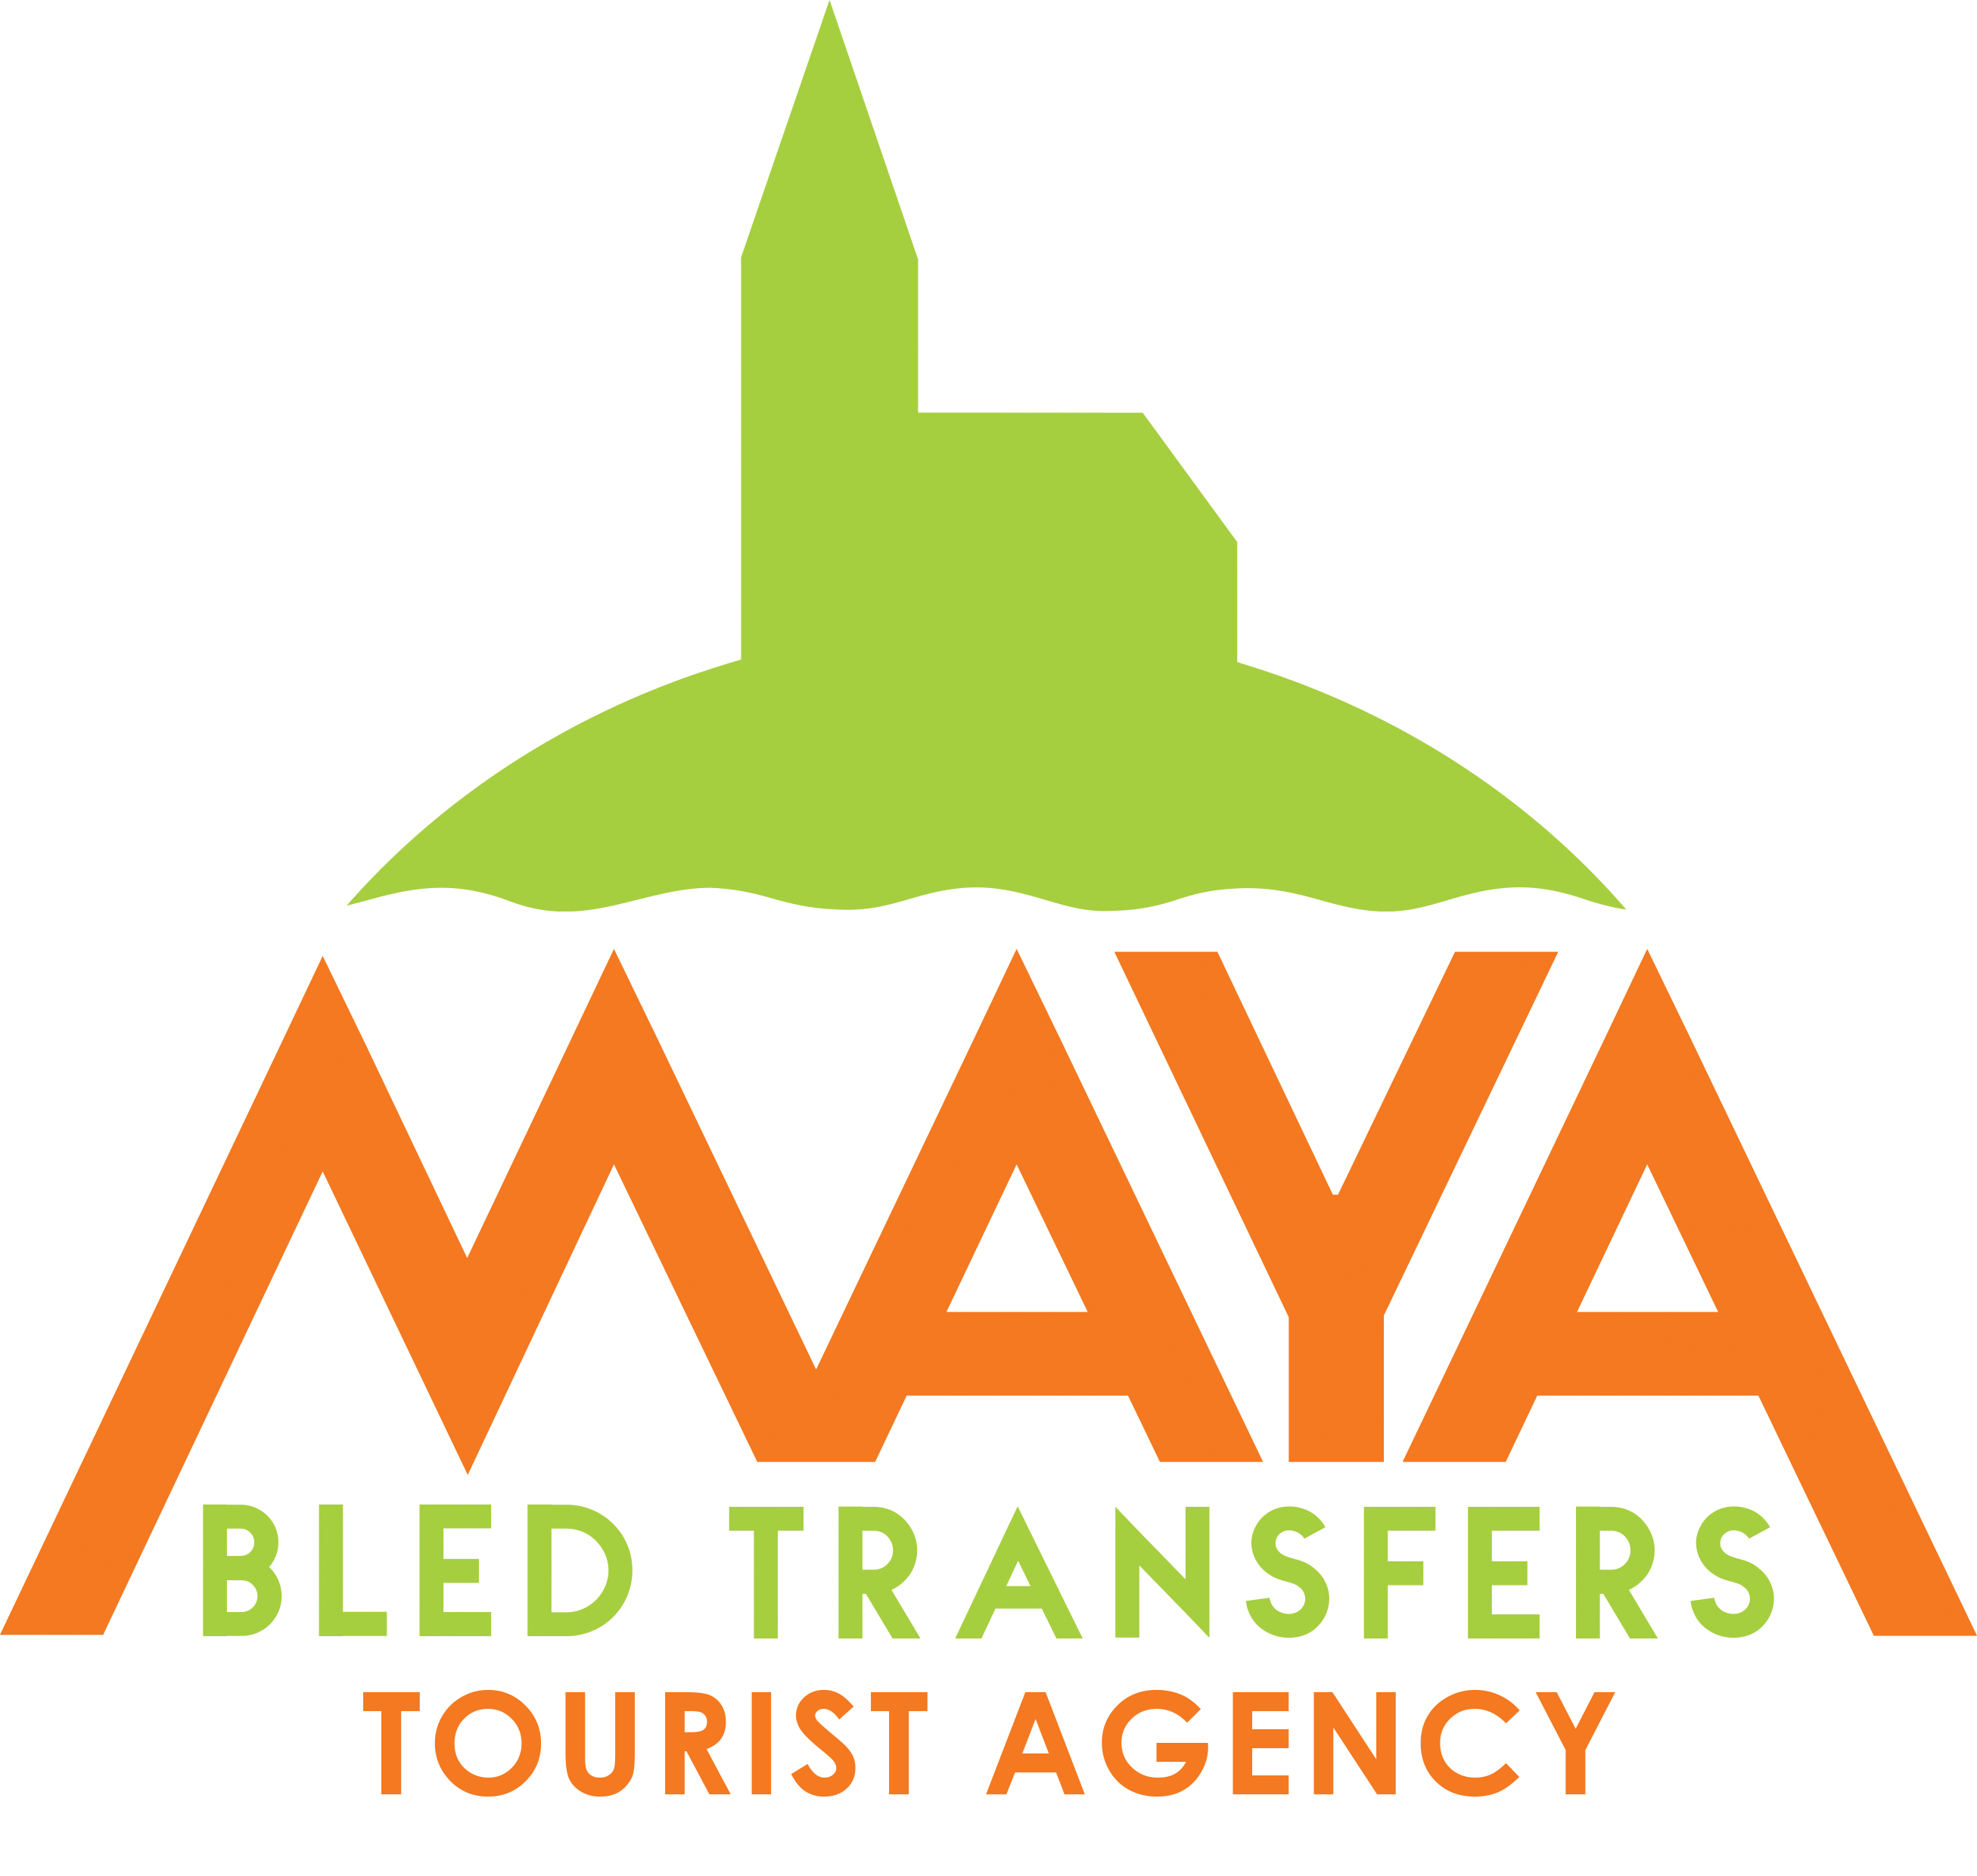 bled transfers taxi transfers daily tours